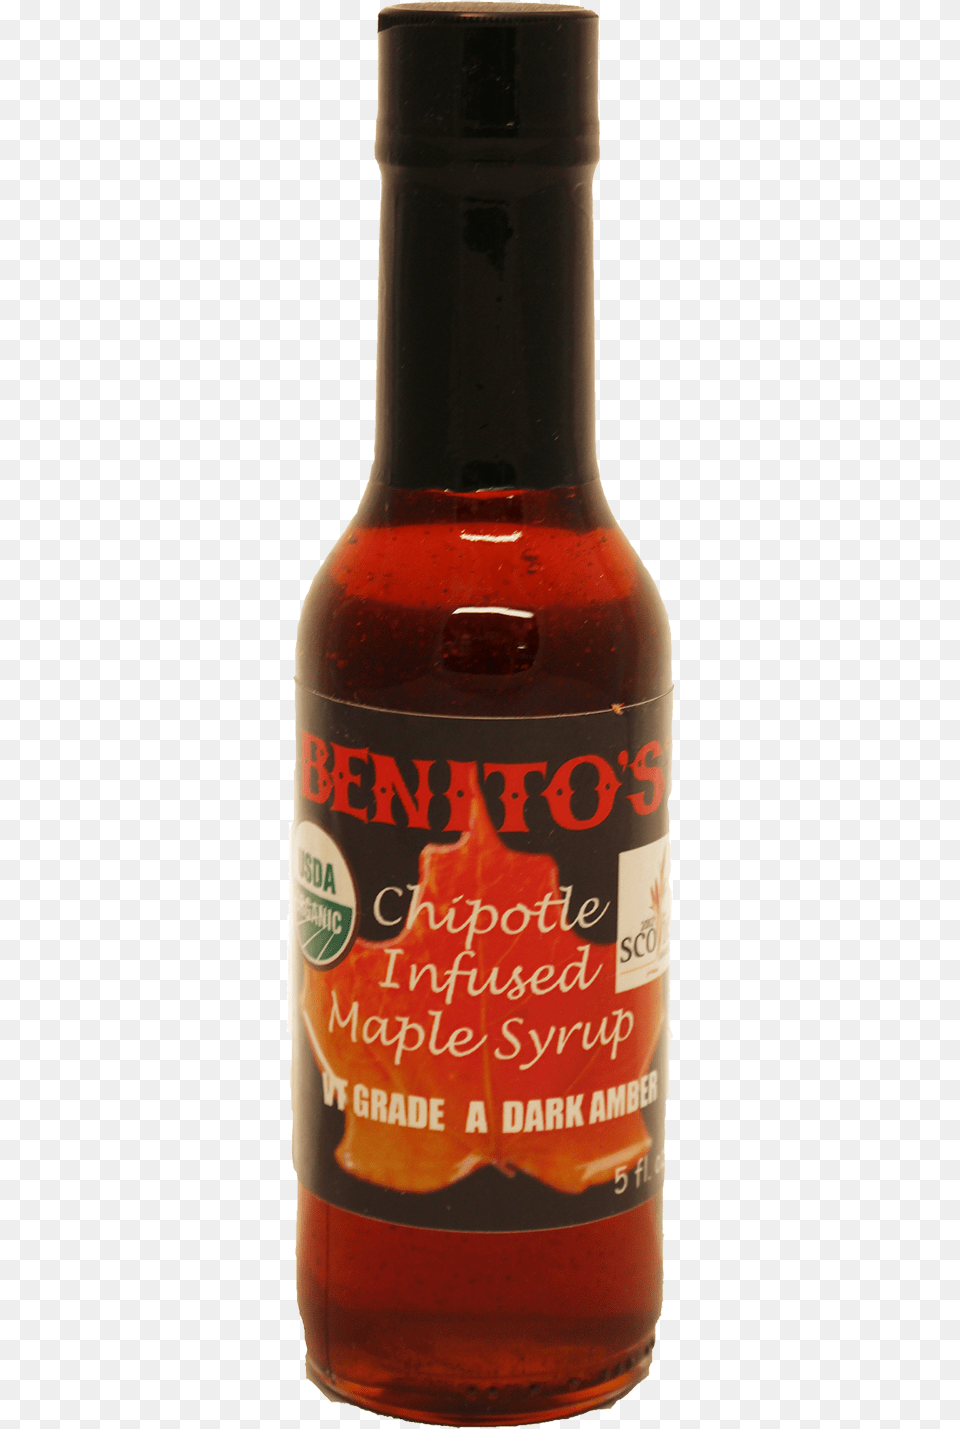 Benitos Hot Sauce Chipolte Infused Maple Syrup Glass Bottle, Alcohol, Beer, Beverage, Food Png